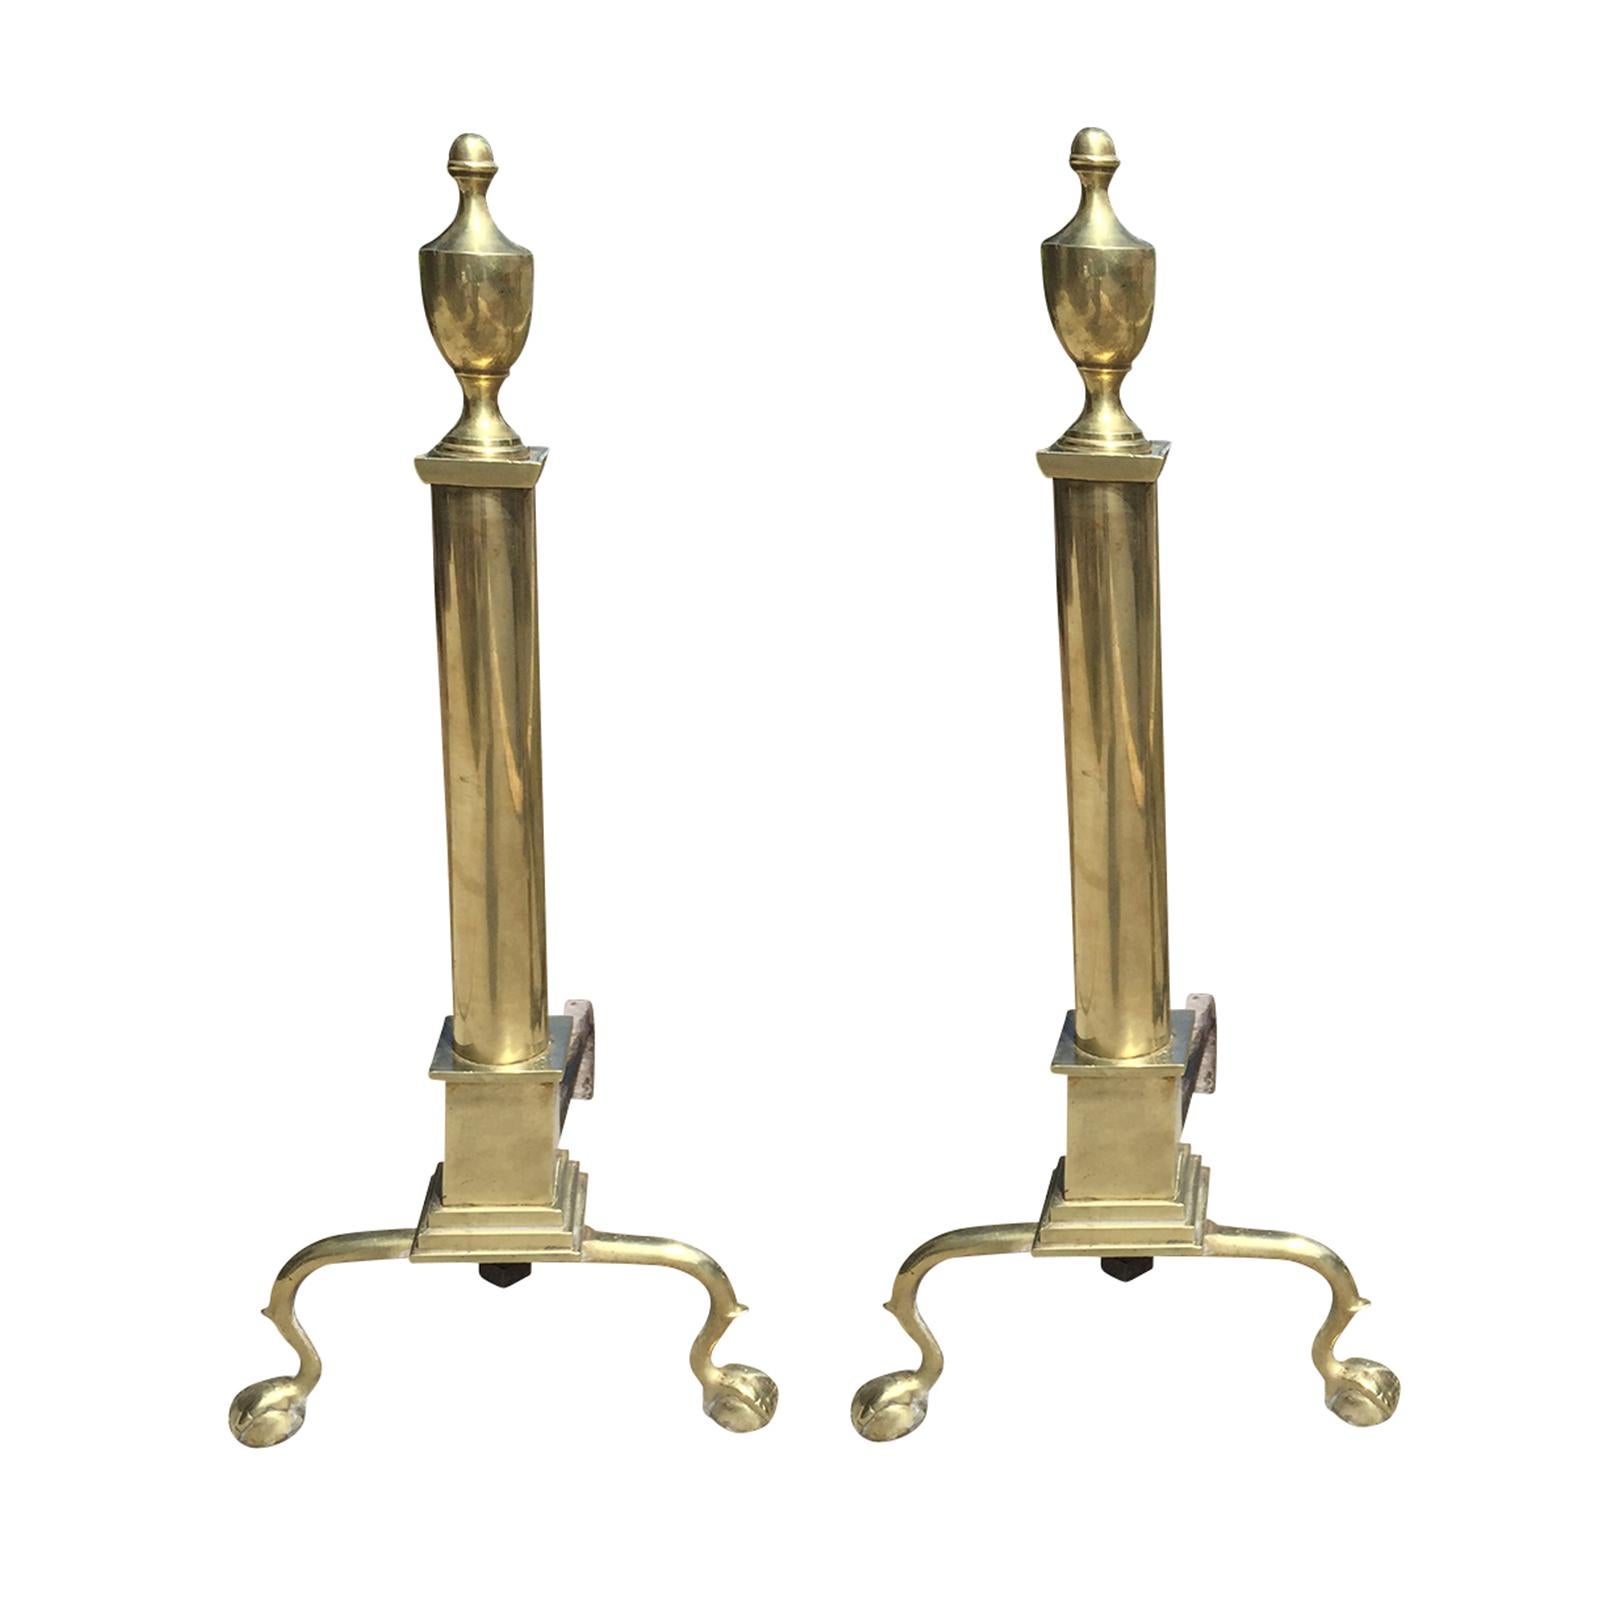 Pair of Large 19th Century or Earlier American Federal Style Brass Andirons